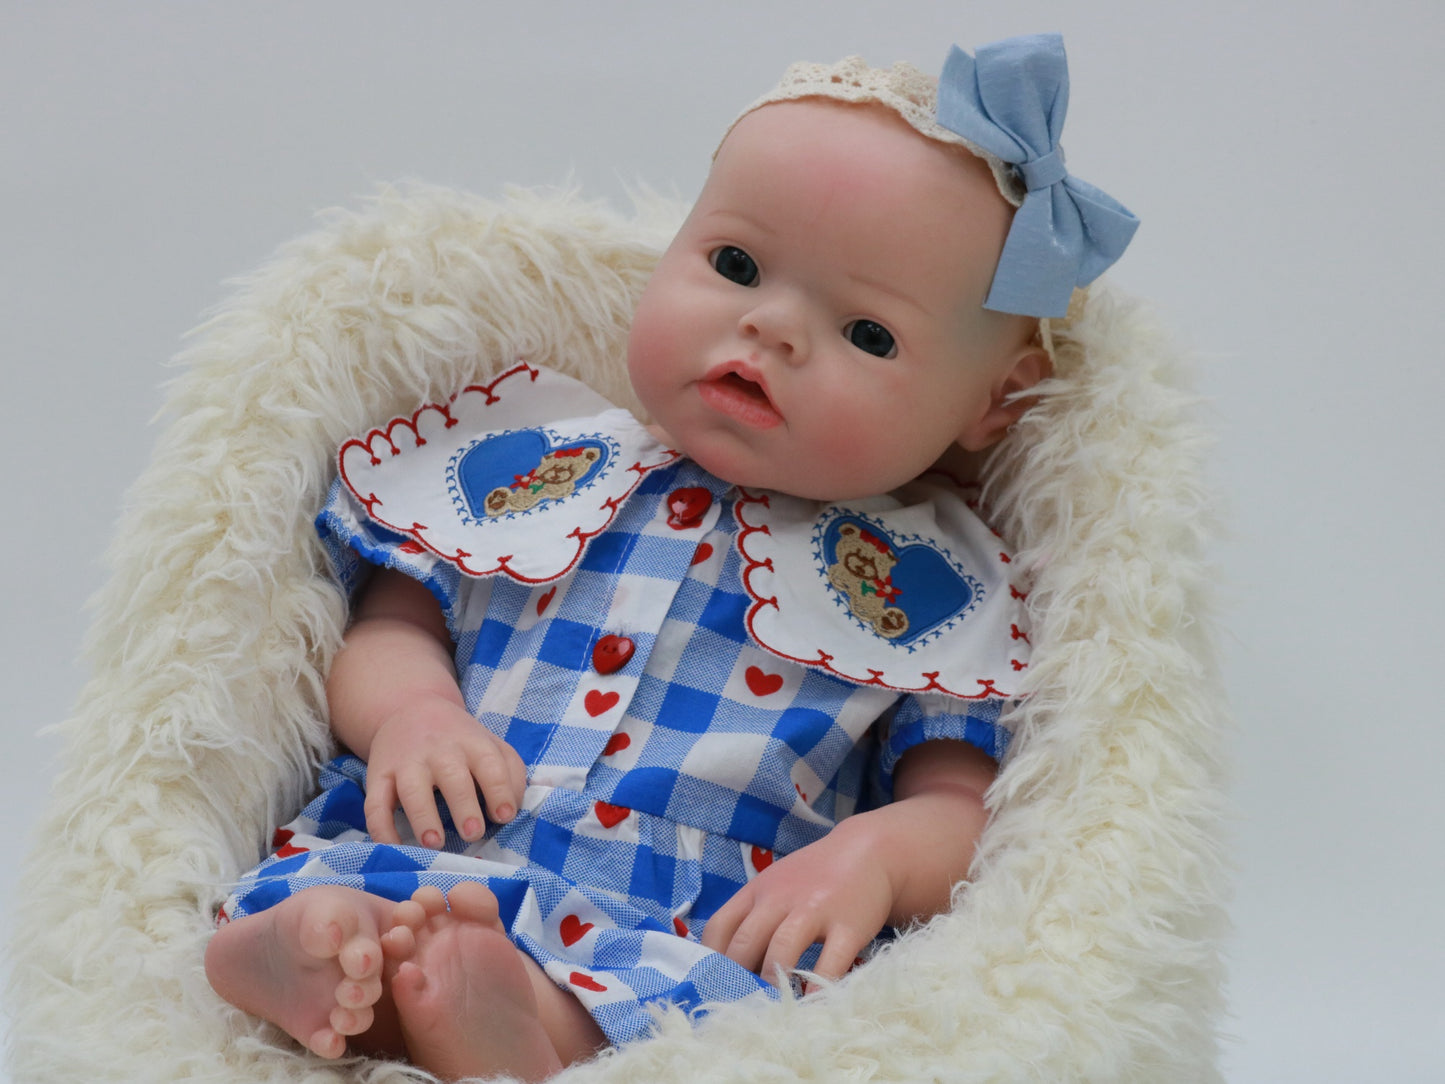 20INCH 50CM Painted Silicone Dolls Full Solid Silicone Bebe Reborn Doll Can Drink Milk & Pee Dolls De Silicone Inteiro